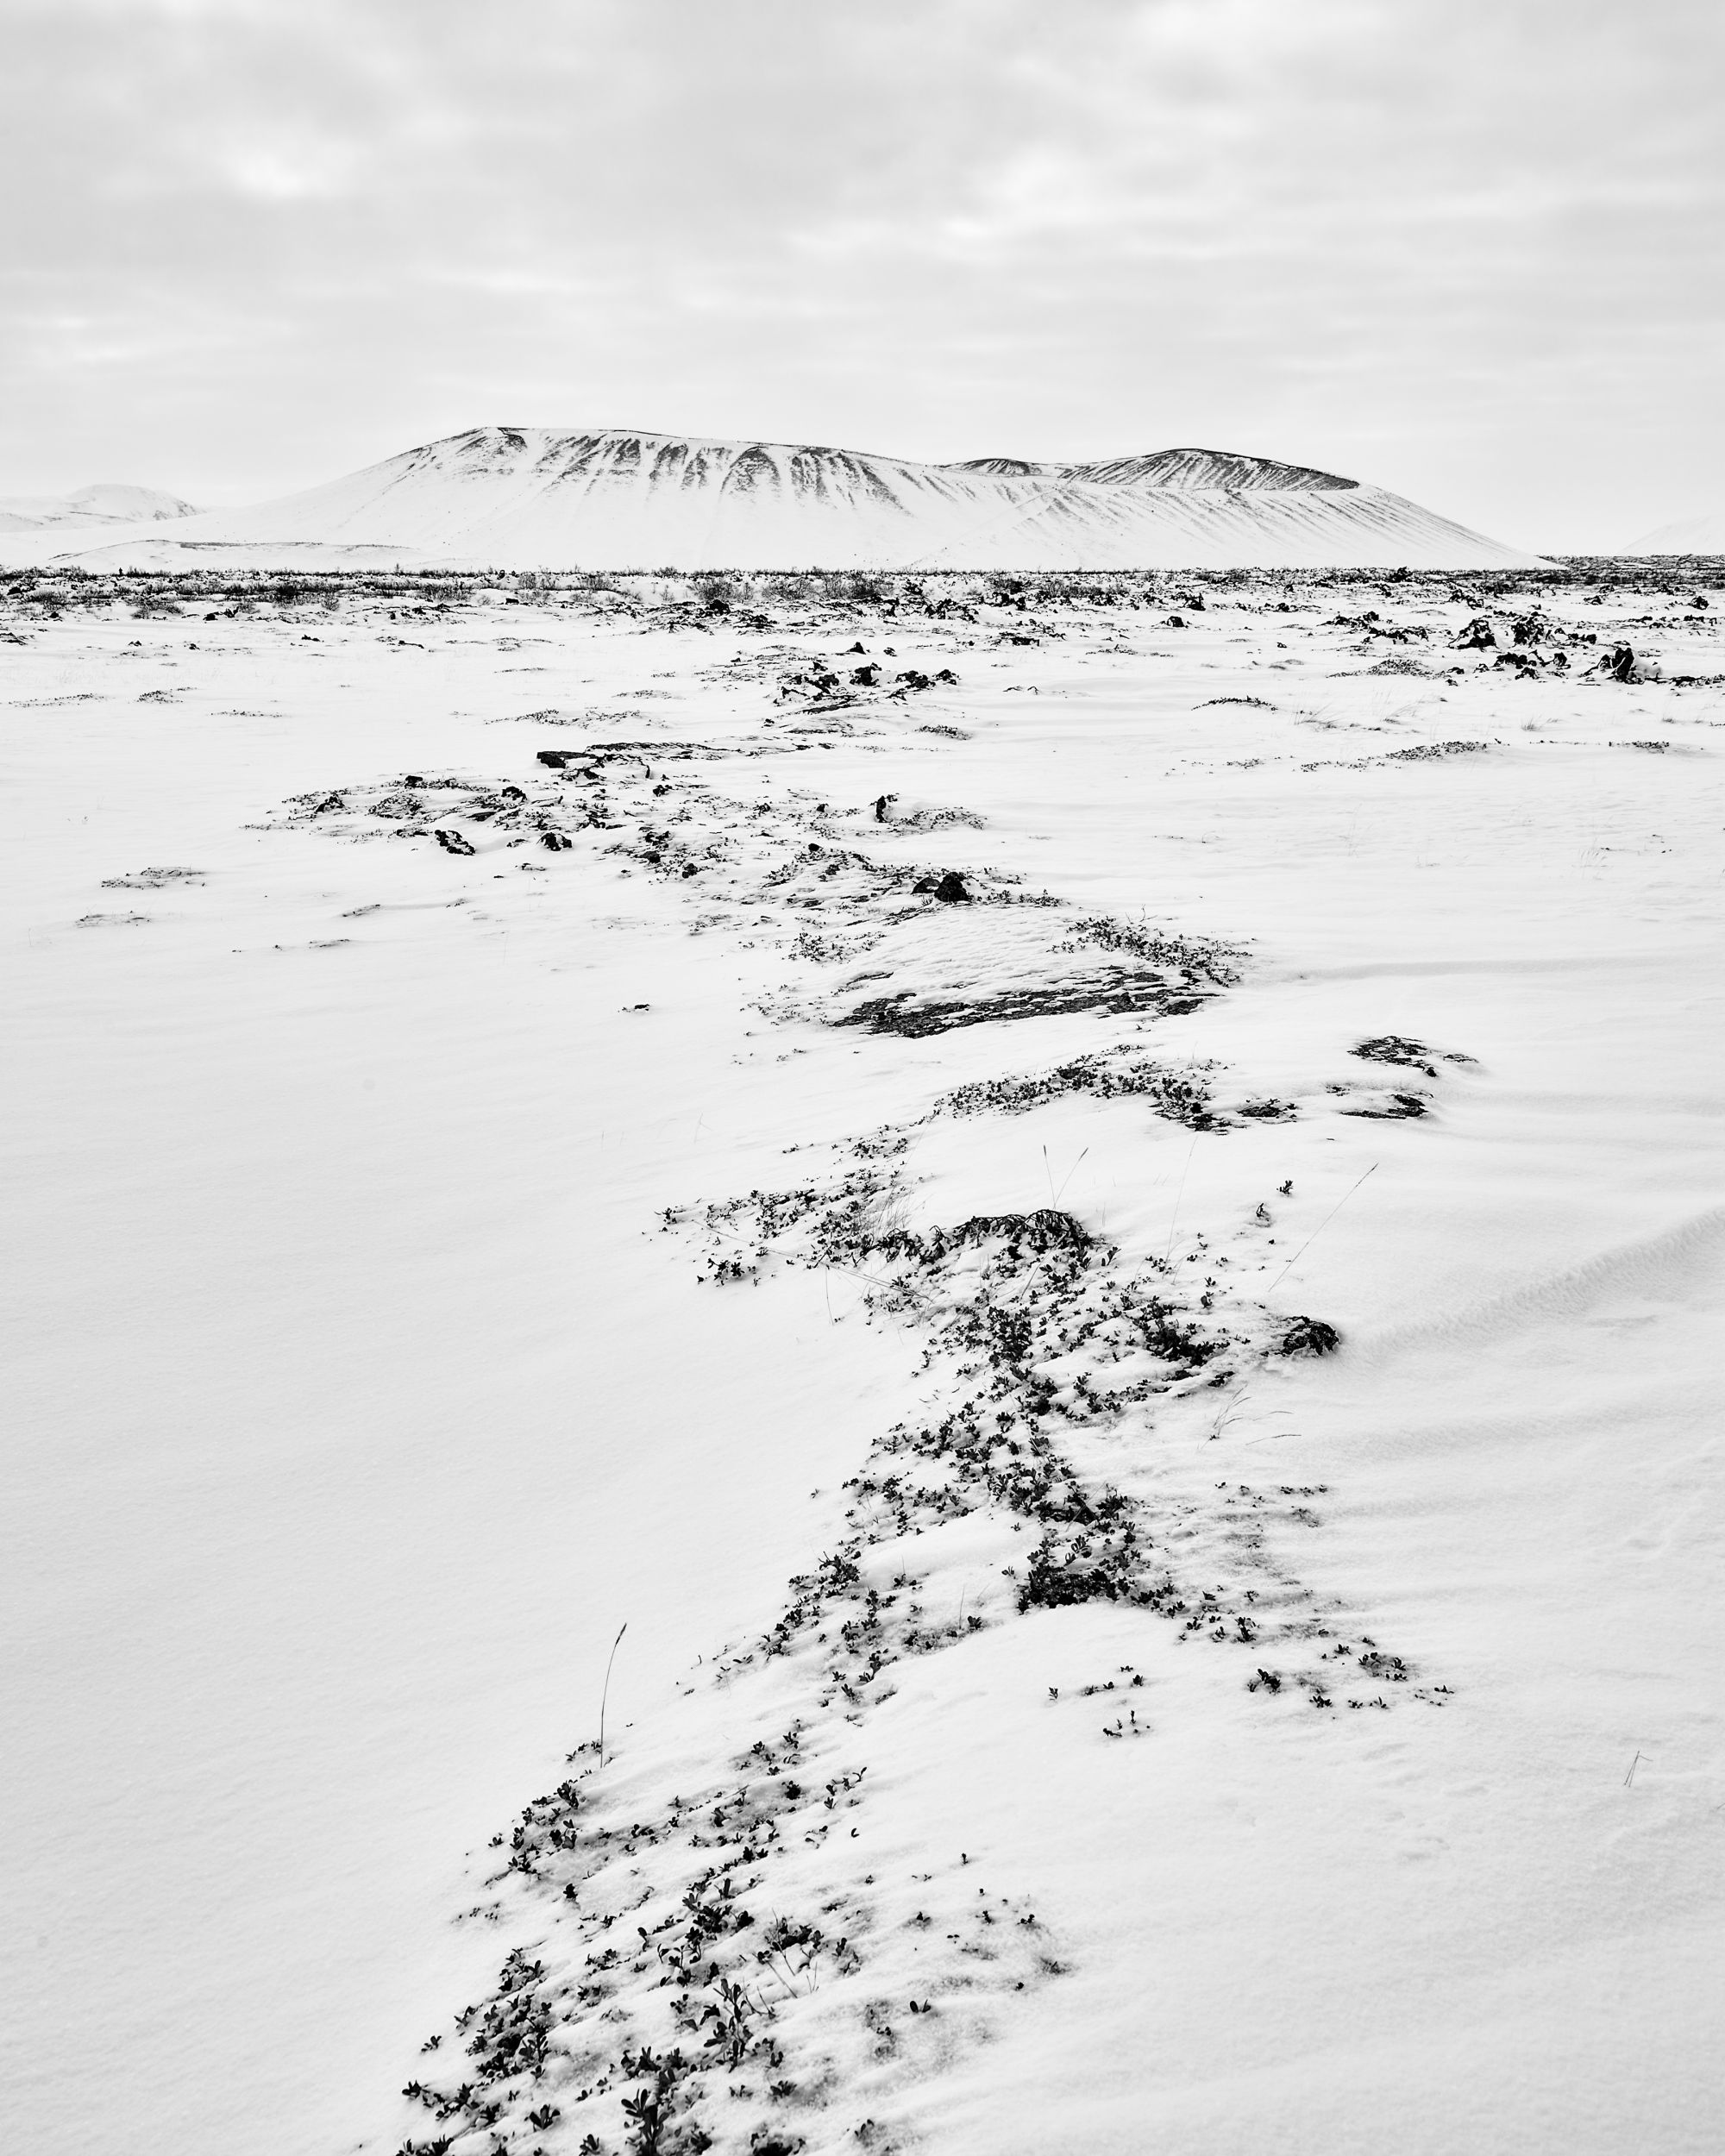 Crater Hverfjall in winter